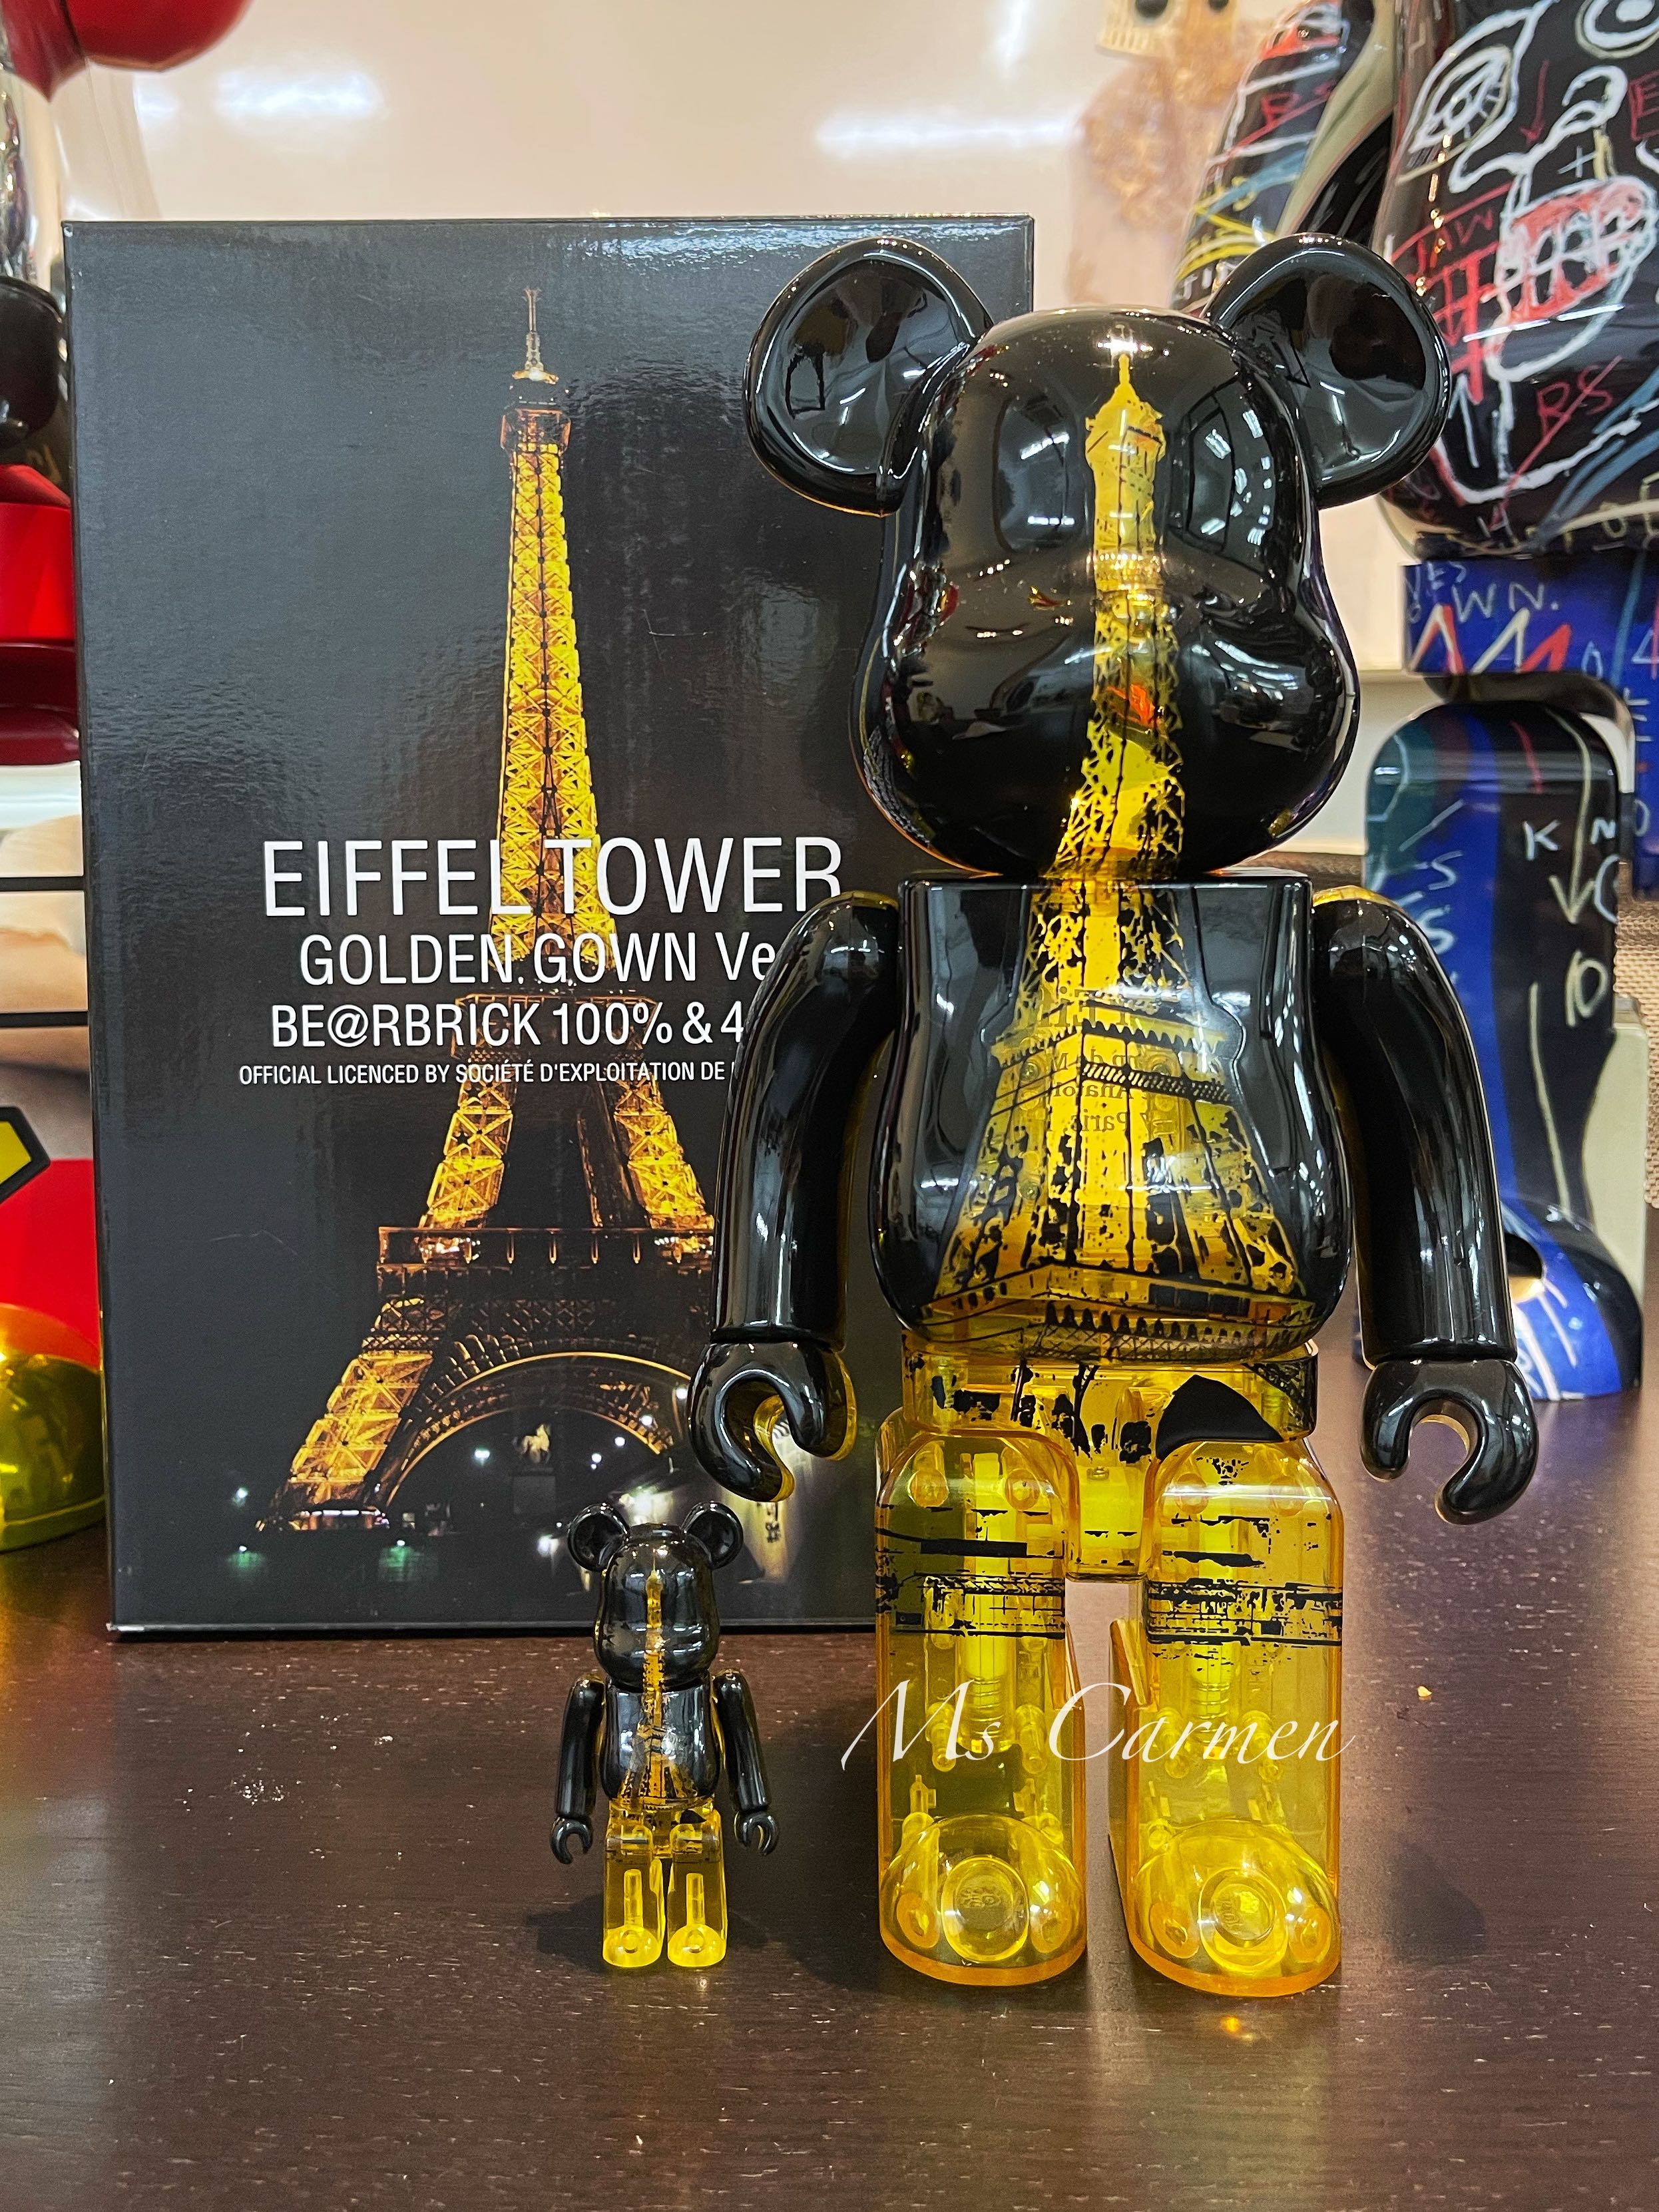 BE@RBRICK EIFFEL TOWER GOLDEN GOWN 1000%エンタメ/ホビー 